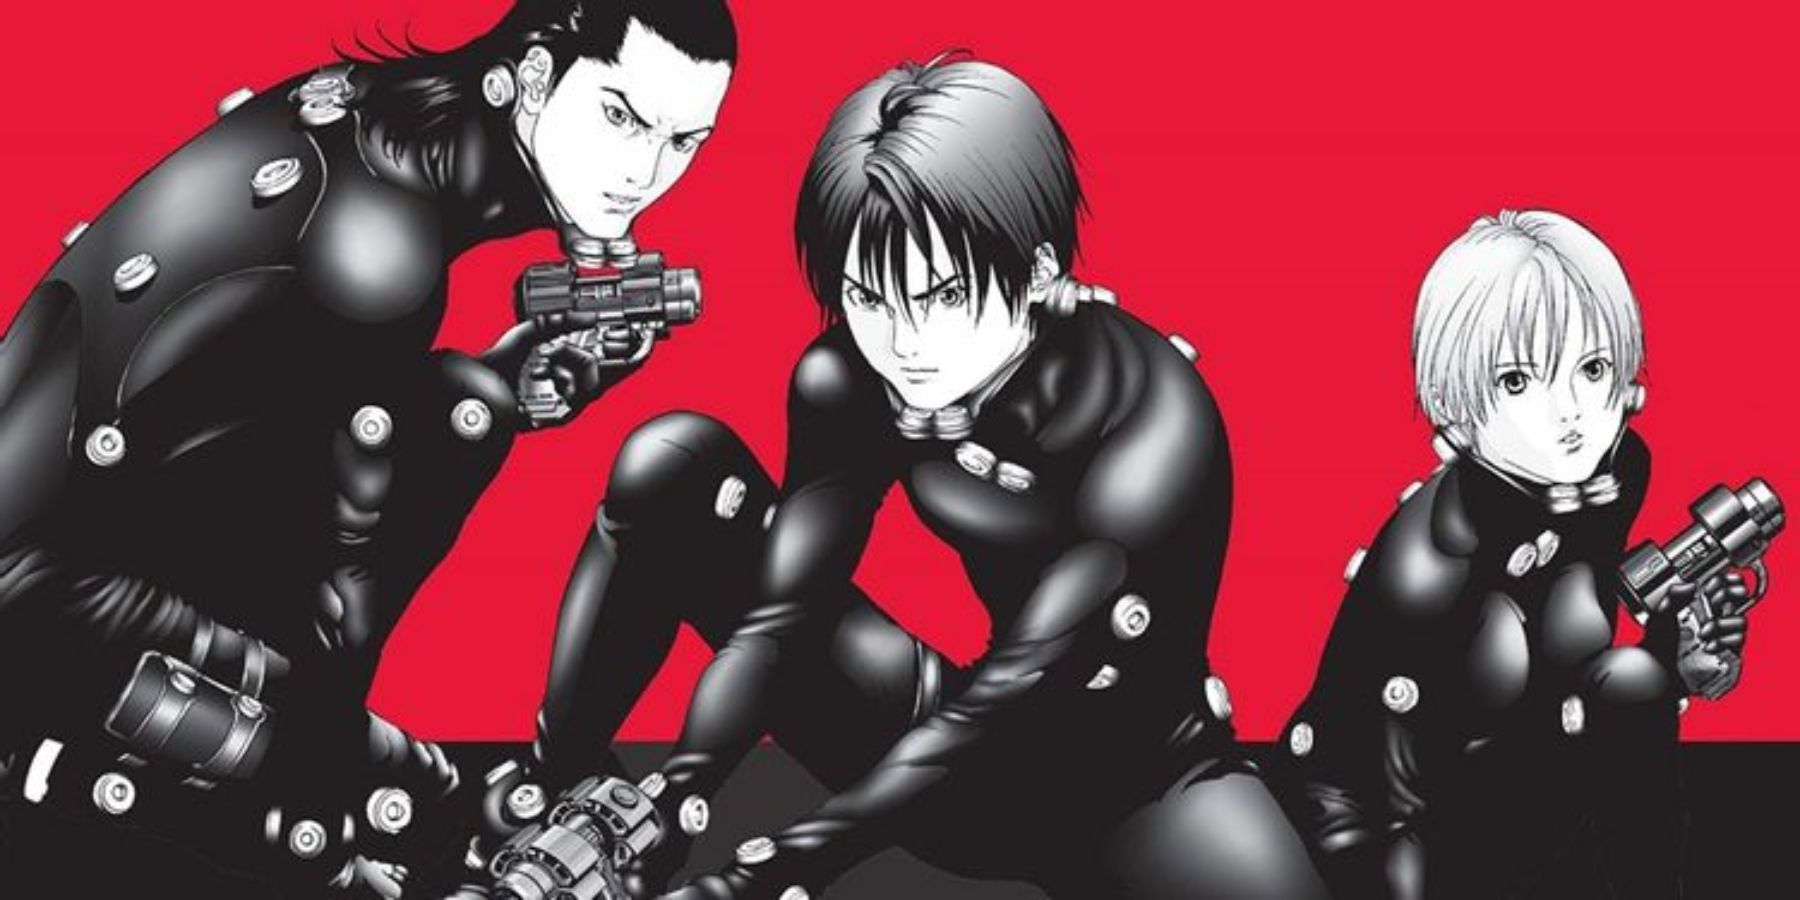 gantz is getting a live-action adaptation from the director of overlord